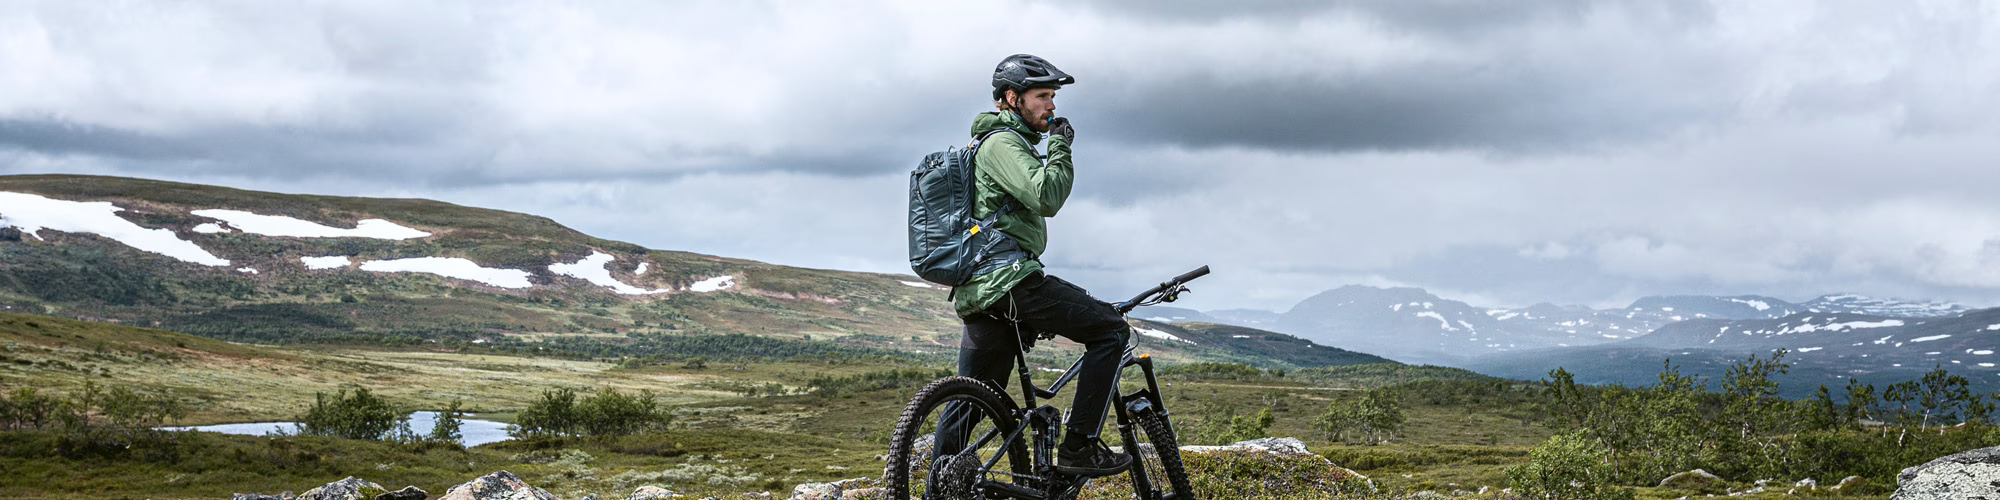 Hydration Pack Safety and Hygiene. Source: Thule